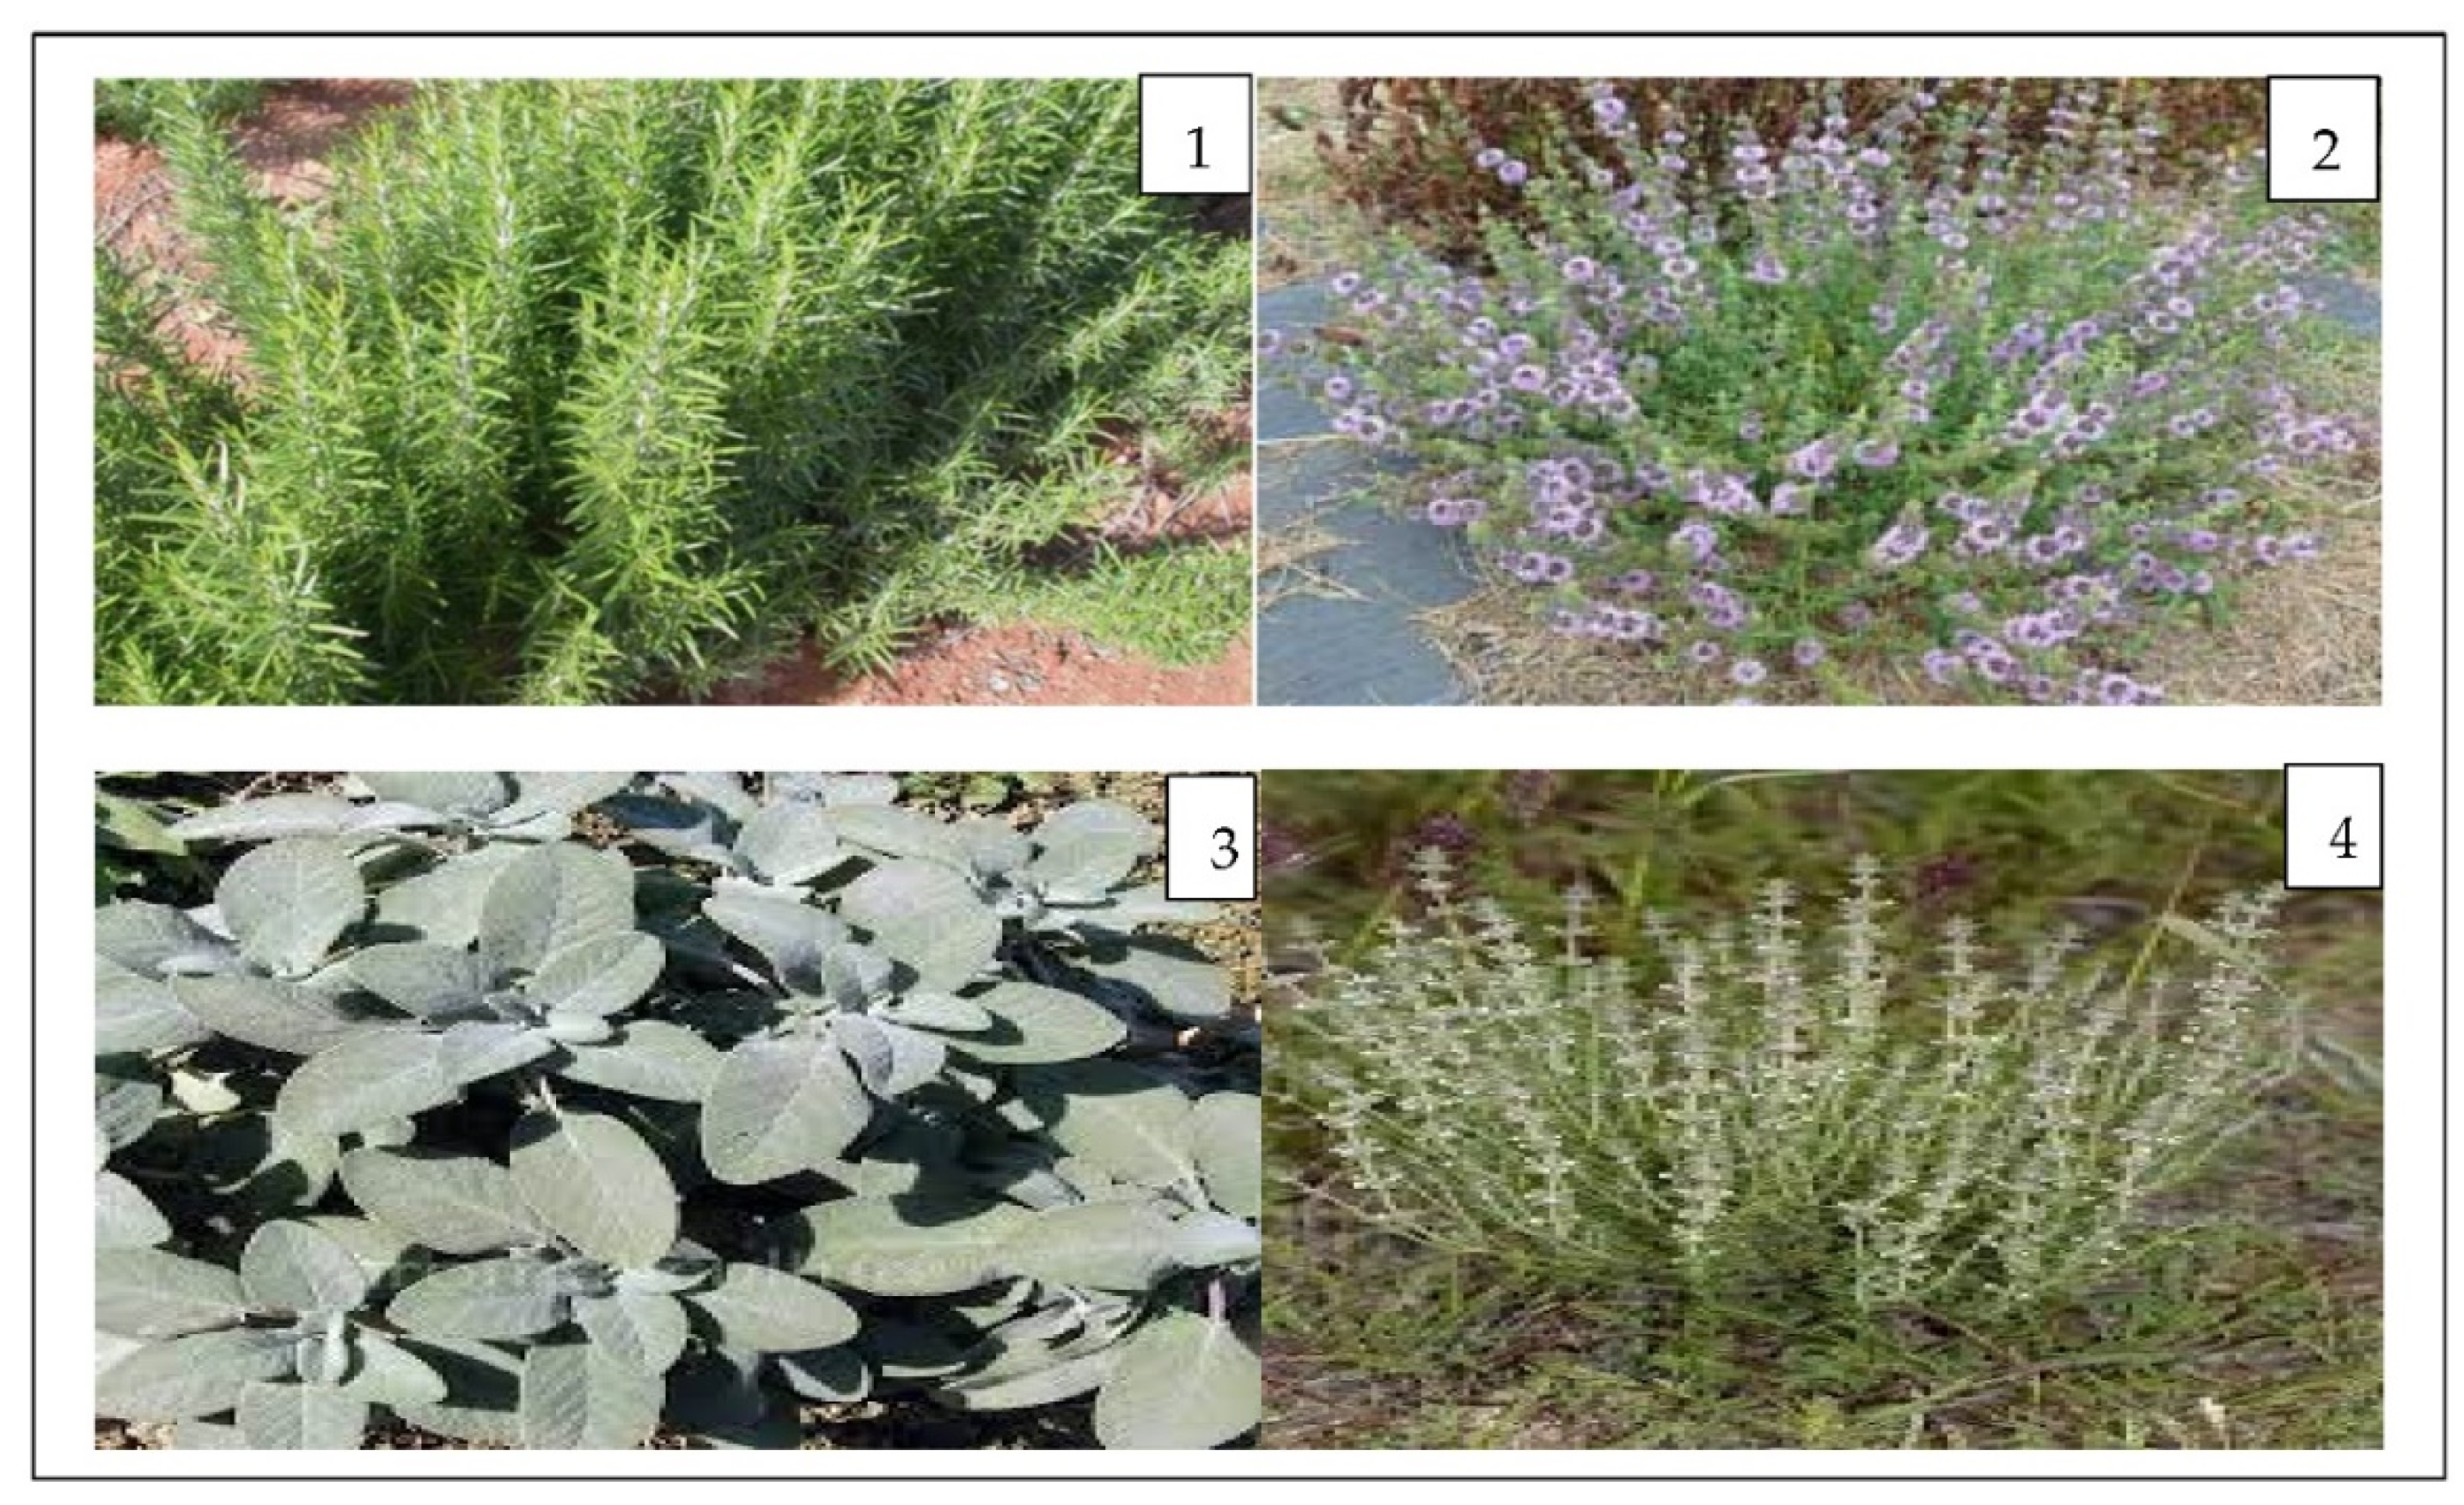 Chemistry | Free Full-Text | Comparative Analysis of the Chemical  Composition and Antimicrobial Activity of Four Moroccan North Middle Atlas  Medicinal Plants&rsquo; Essential Oils: Rosmarinus officinalis L., Mentha  pulegium L., Salvia officinalis